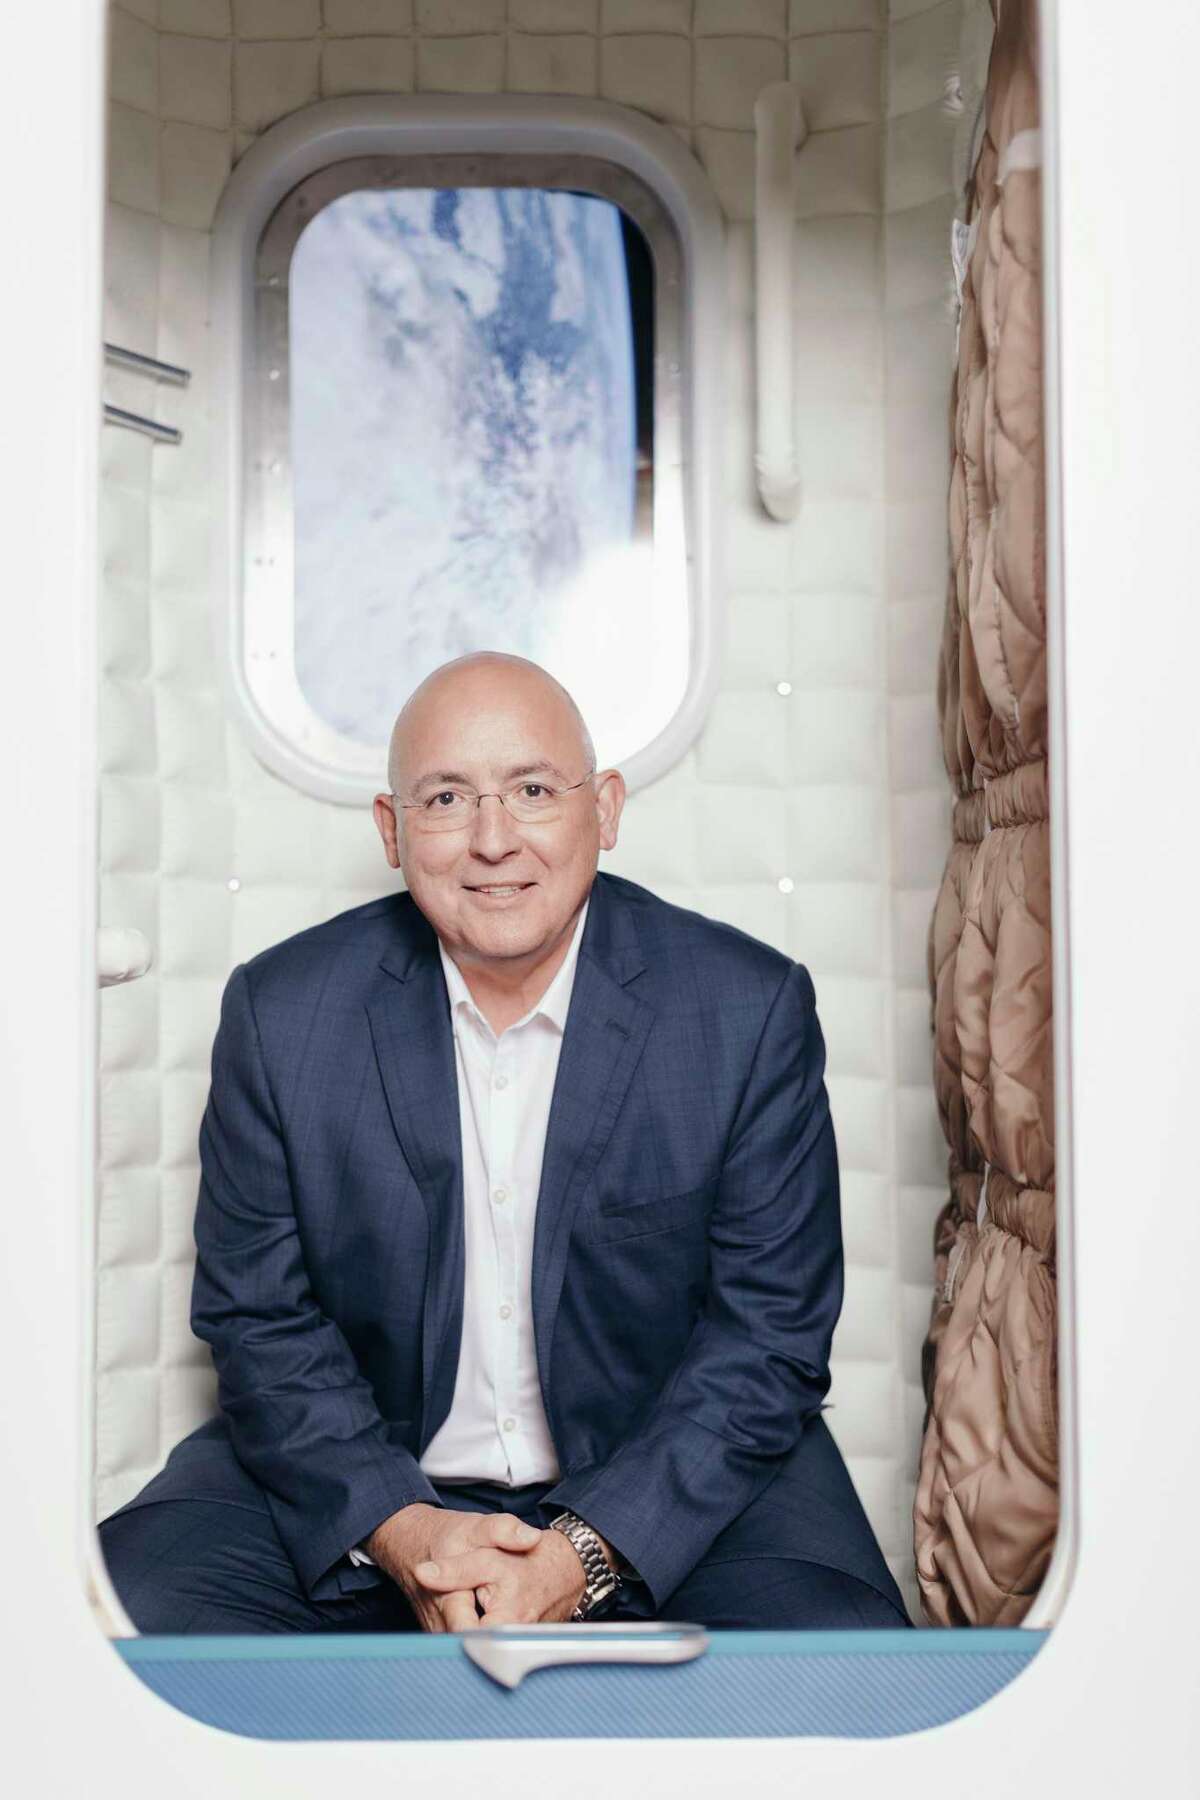 Michael Suffredini, president and chief executive of Axiom Space, and a former manager of NASA’s part of the International Space Station, in Houston, May 31, 2018.